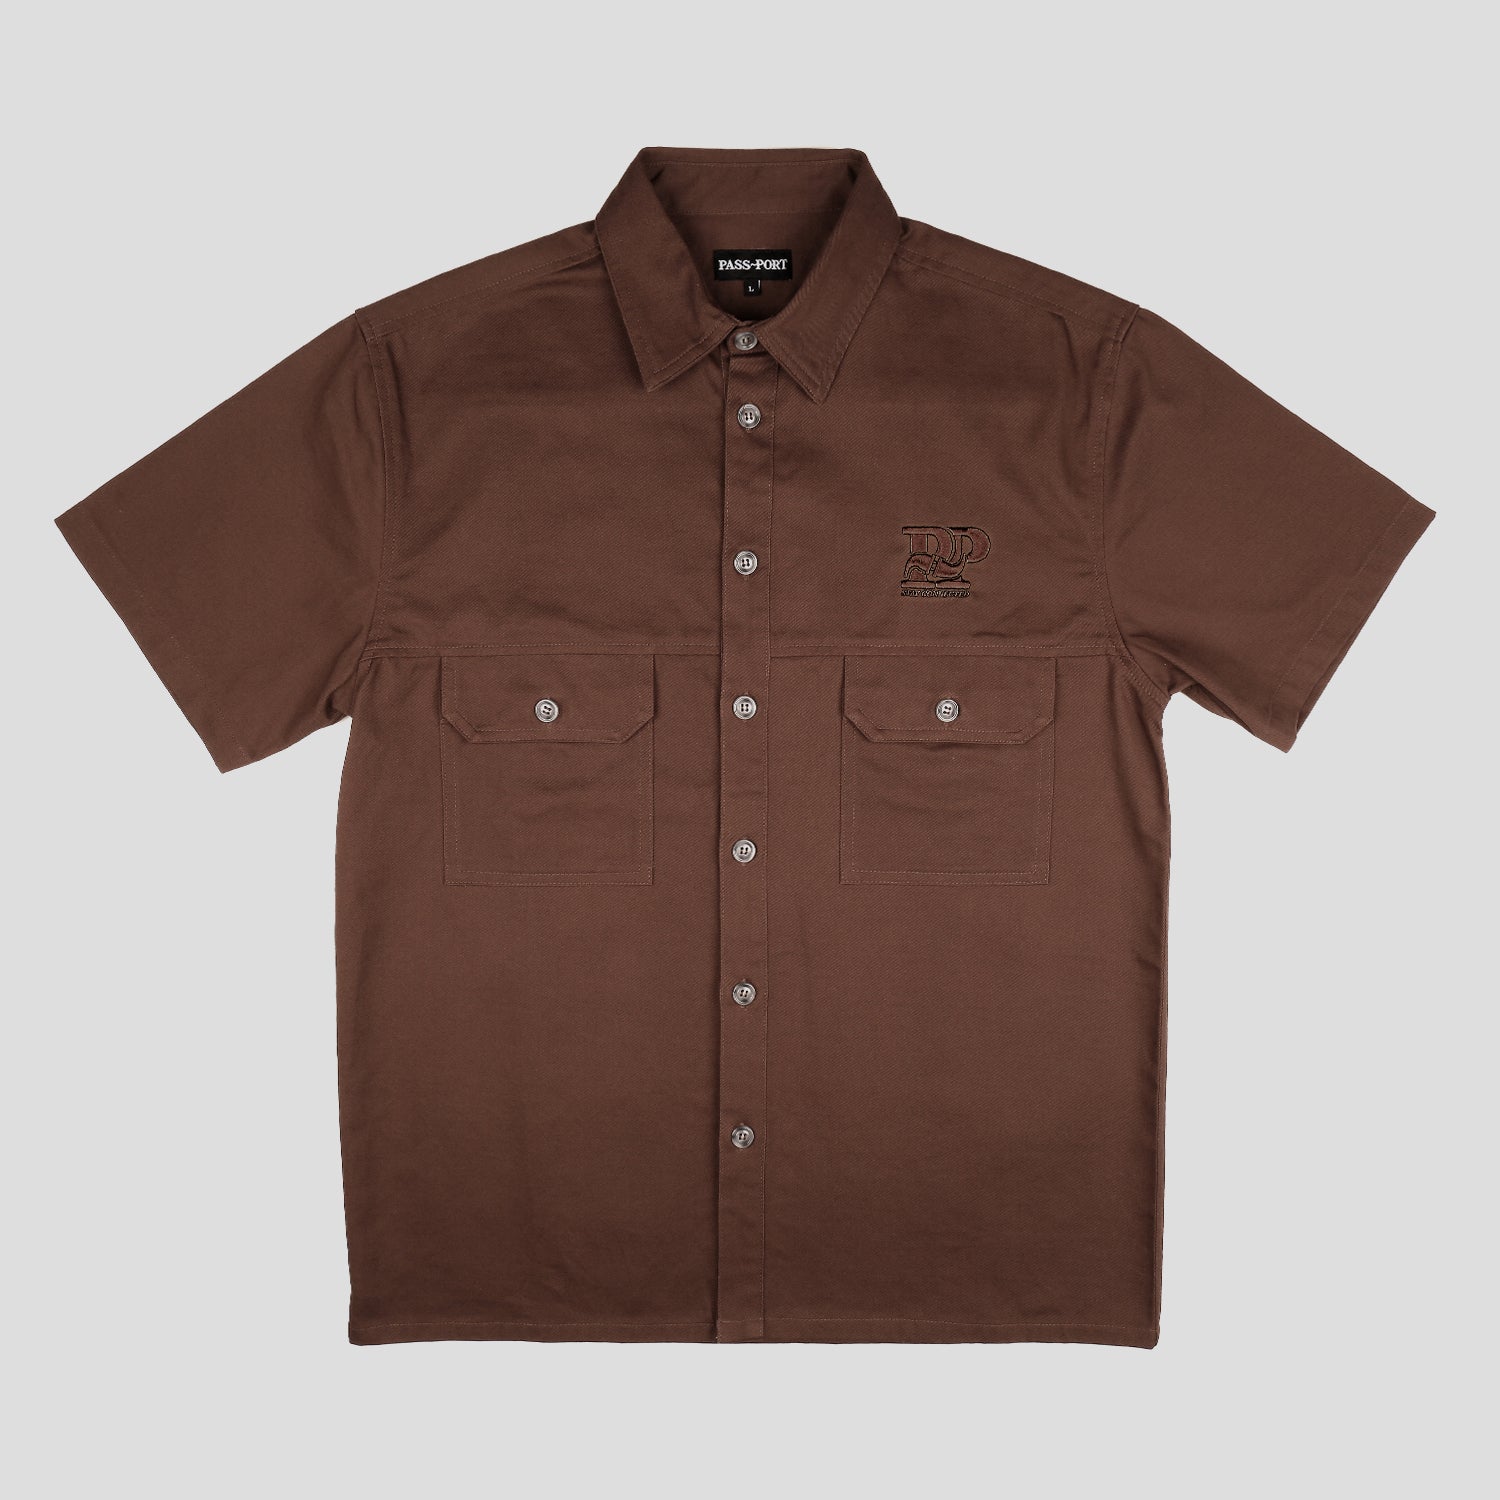 Stay Connected Sparky Shortsleeve Shirt (Choc)